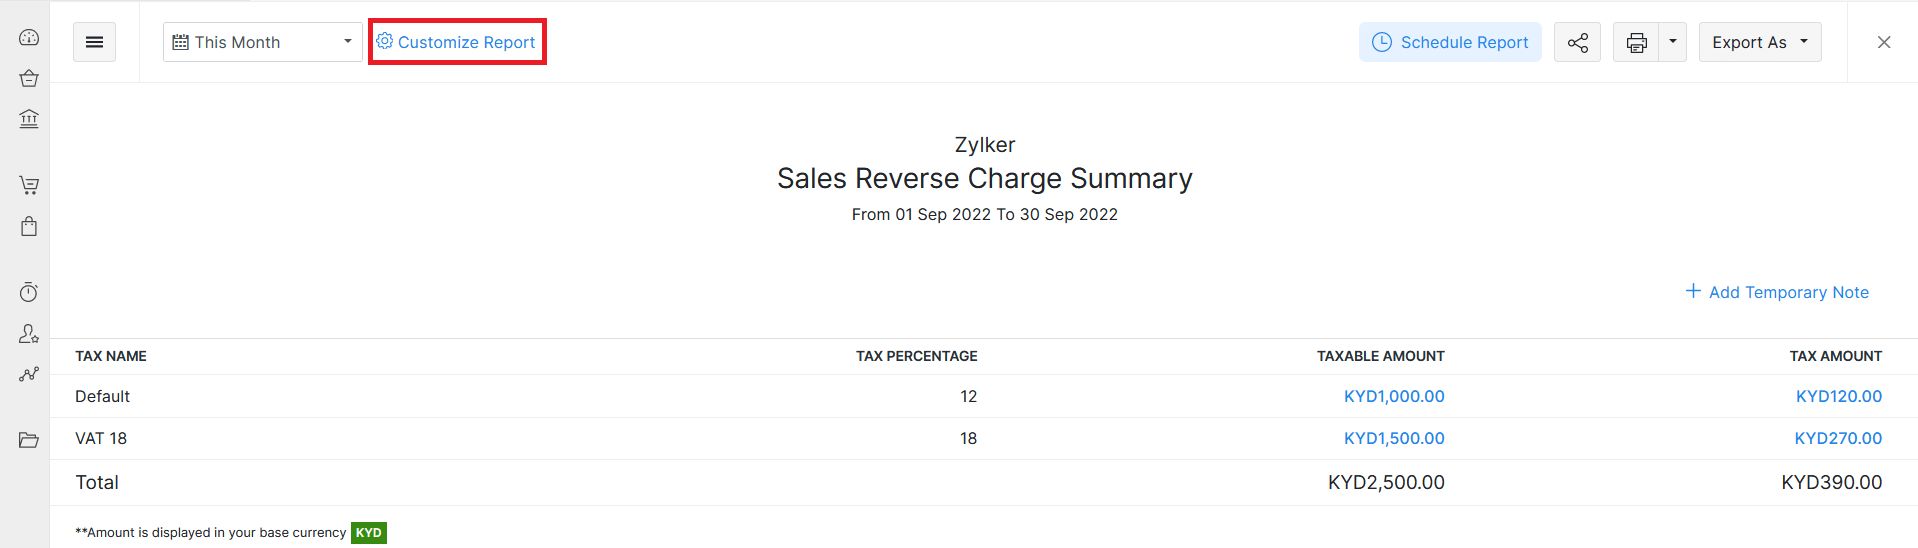 Customizing Sales Reverse Charge Summary report